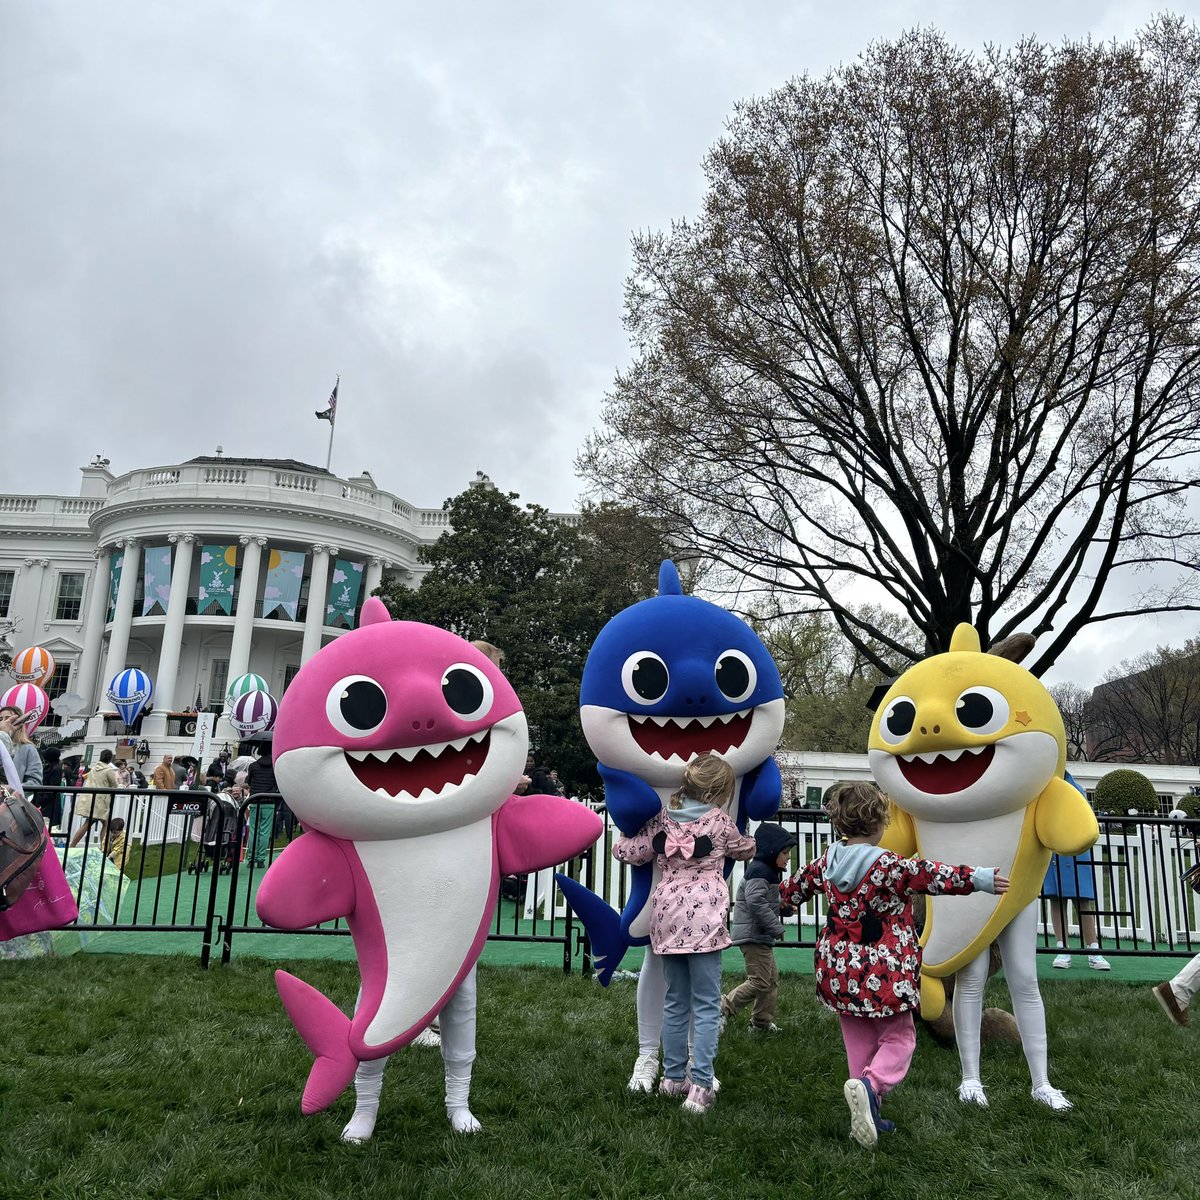 🎉🥚 Egg-citing News! Guess who showed up at the 2024 @WhiteHouse Easter Egg Roll? Baby Shark, Mommy Shark, and Daddy Shark!🦈 We were so happy to meet all families and friends in the DC area💛 #Whitehouse #Easter #Eggducation